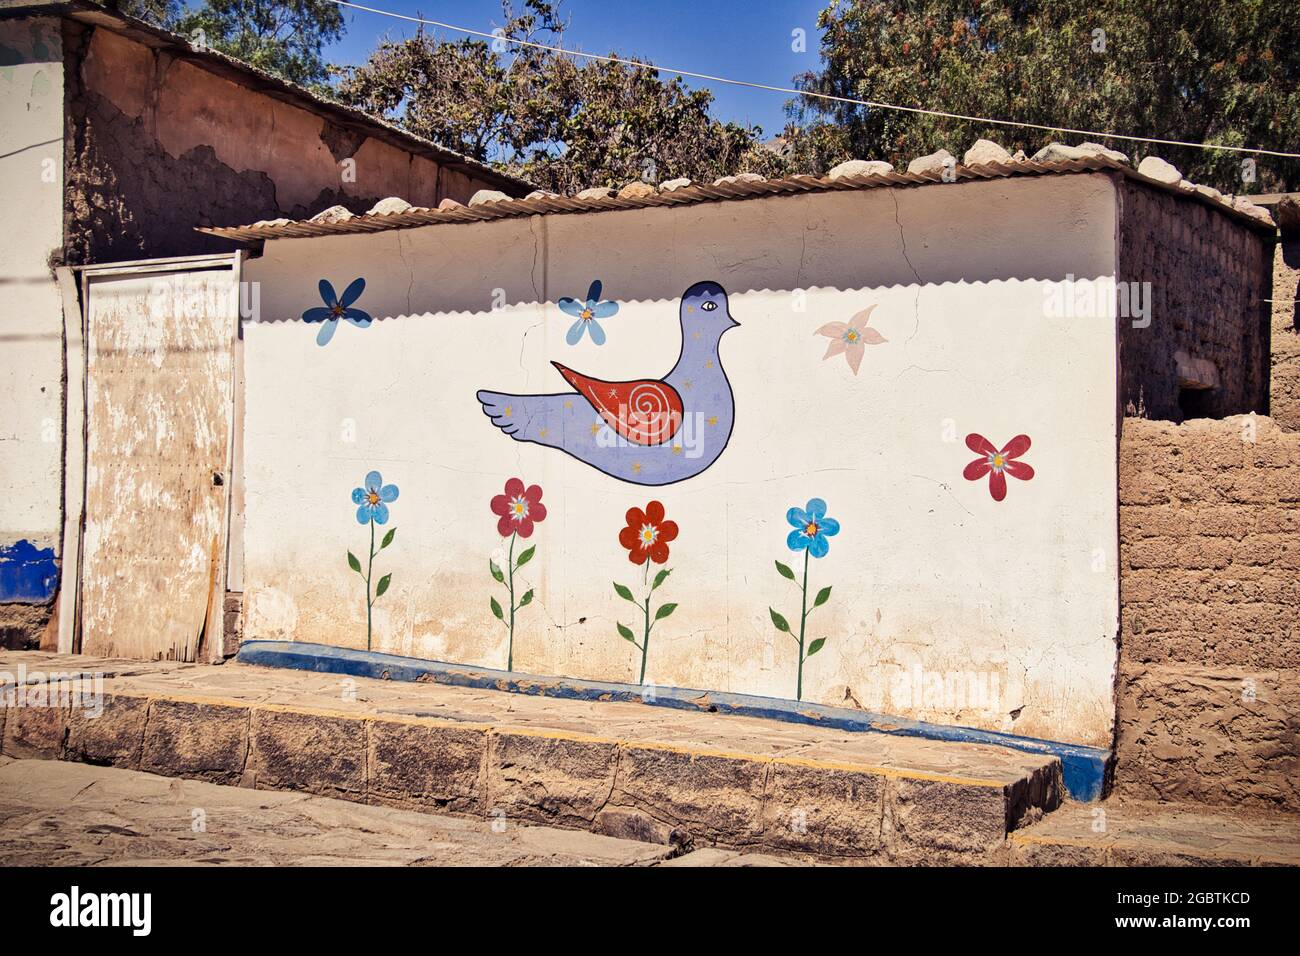 Wall painting at Rural small town in Perú Stock Photo